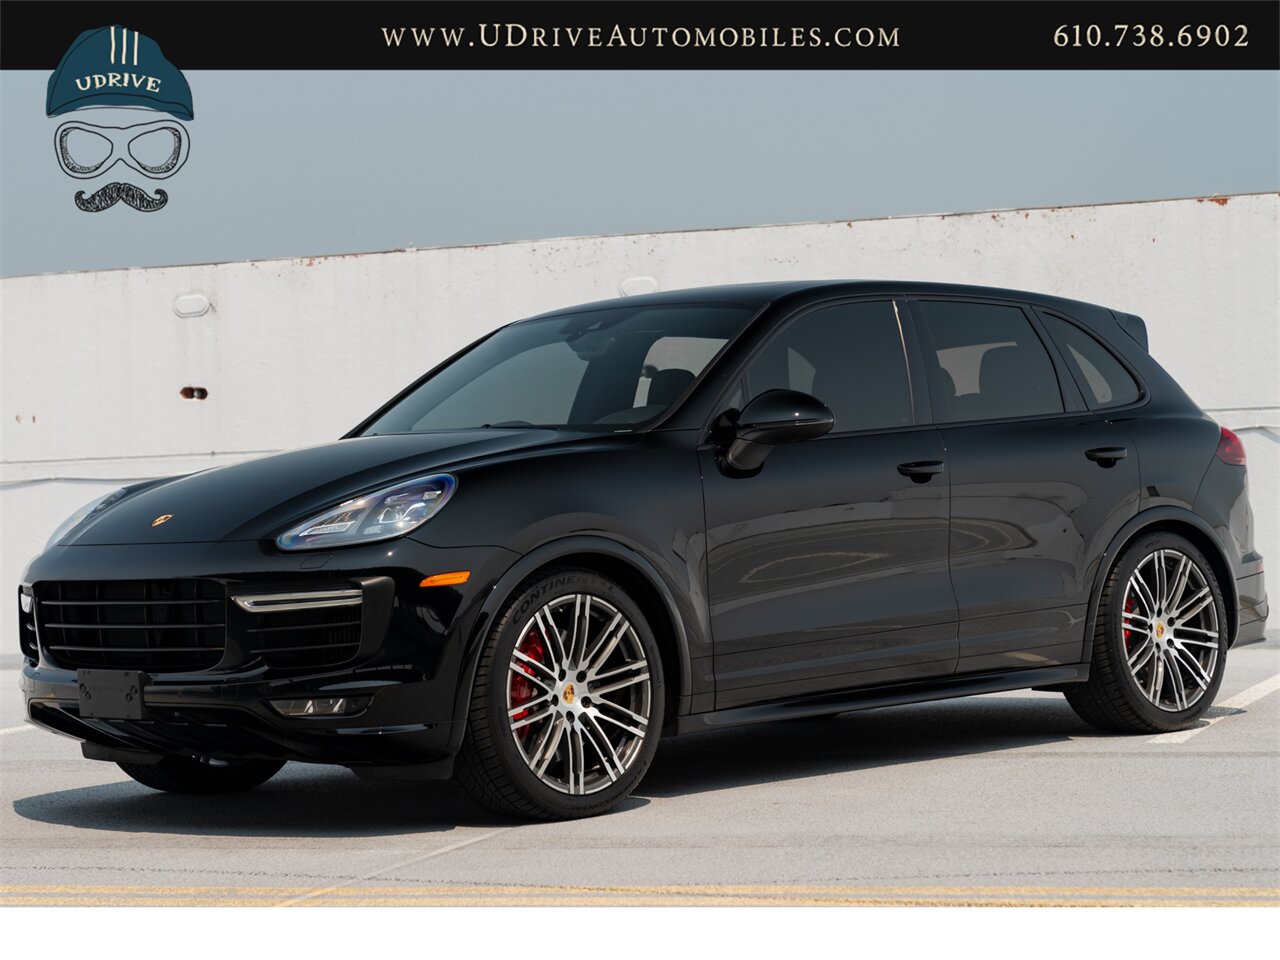 2016 Porsche Cayenne GTS  CPO Warranty 21in Whls Sport Chrono Red Dial Alcantara Red Belts Pano - Photo 12 - West Chester, PA 19382